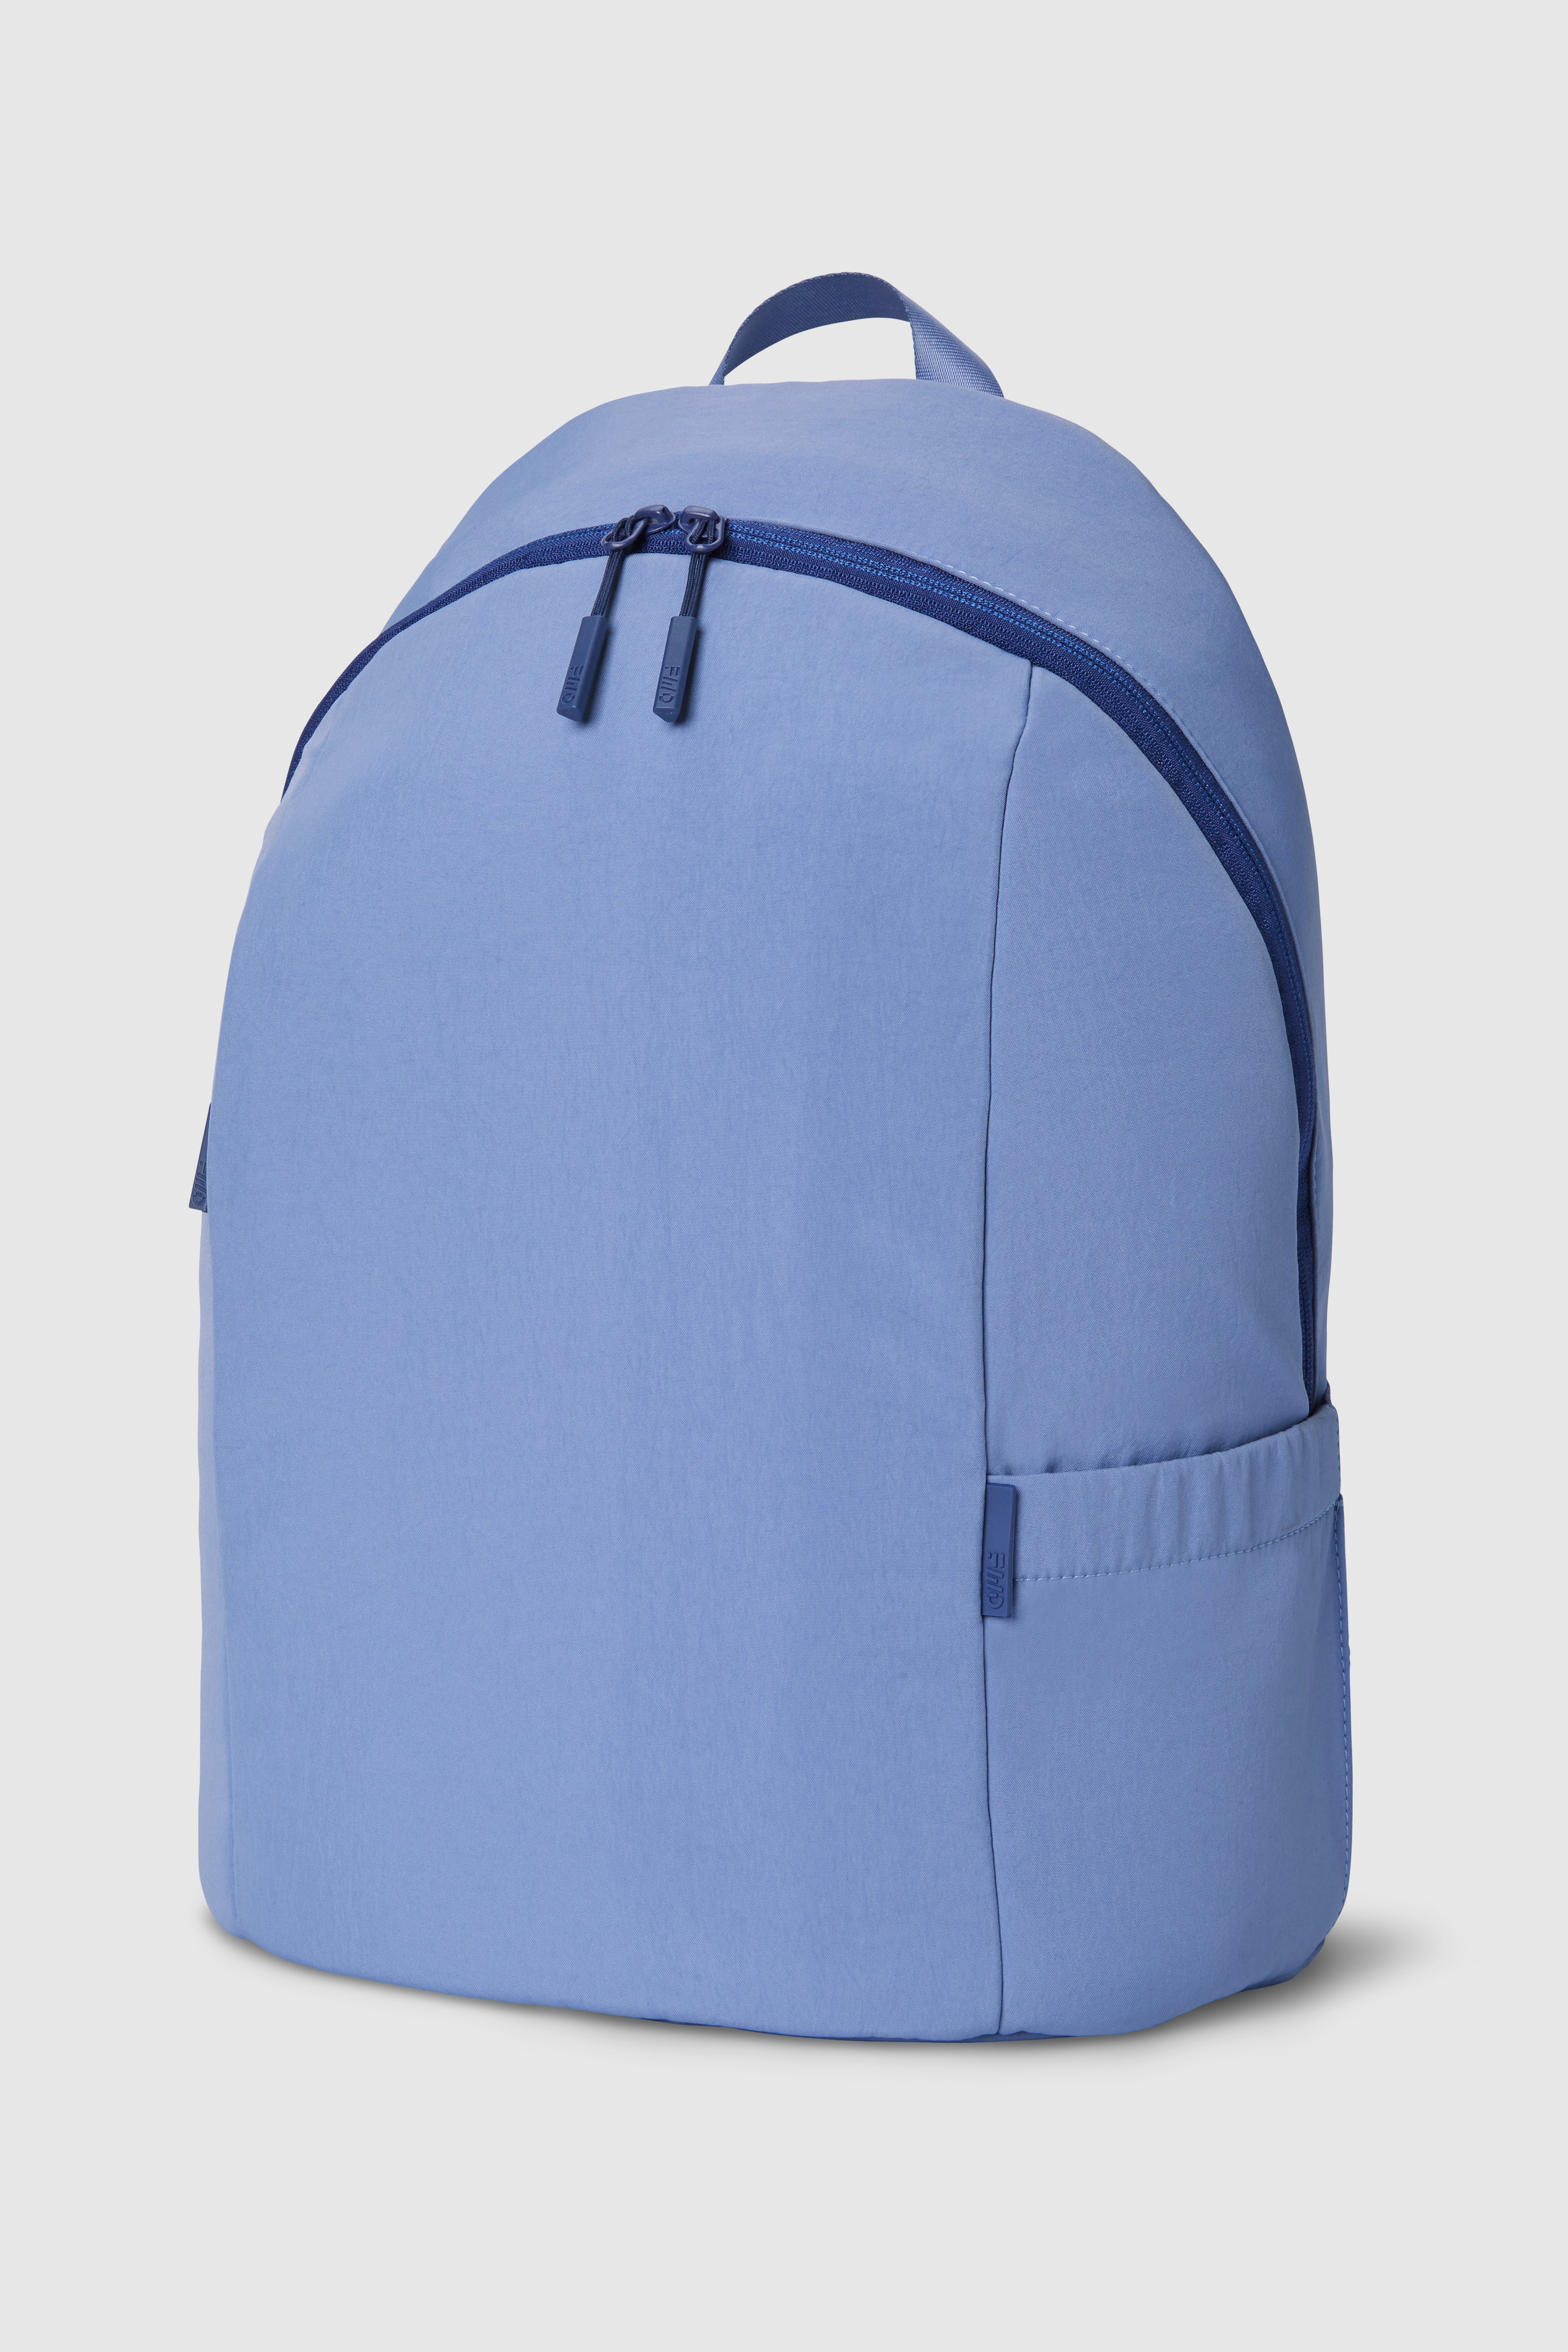 FWD Pleated Backpack 18L - ACCESSORIES BAGS & BACKPACKS